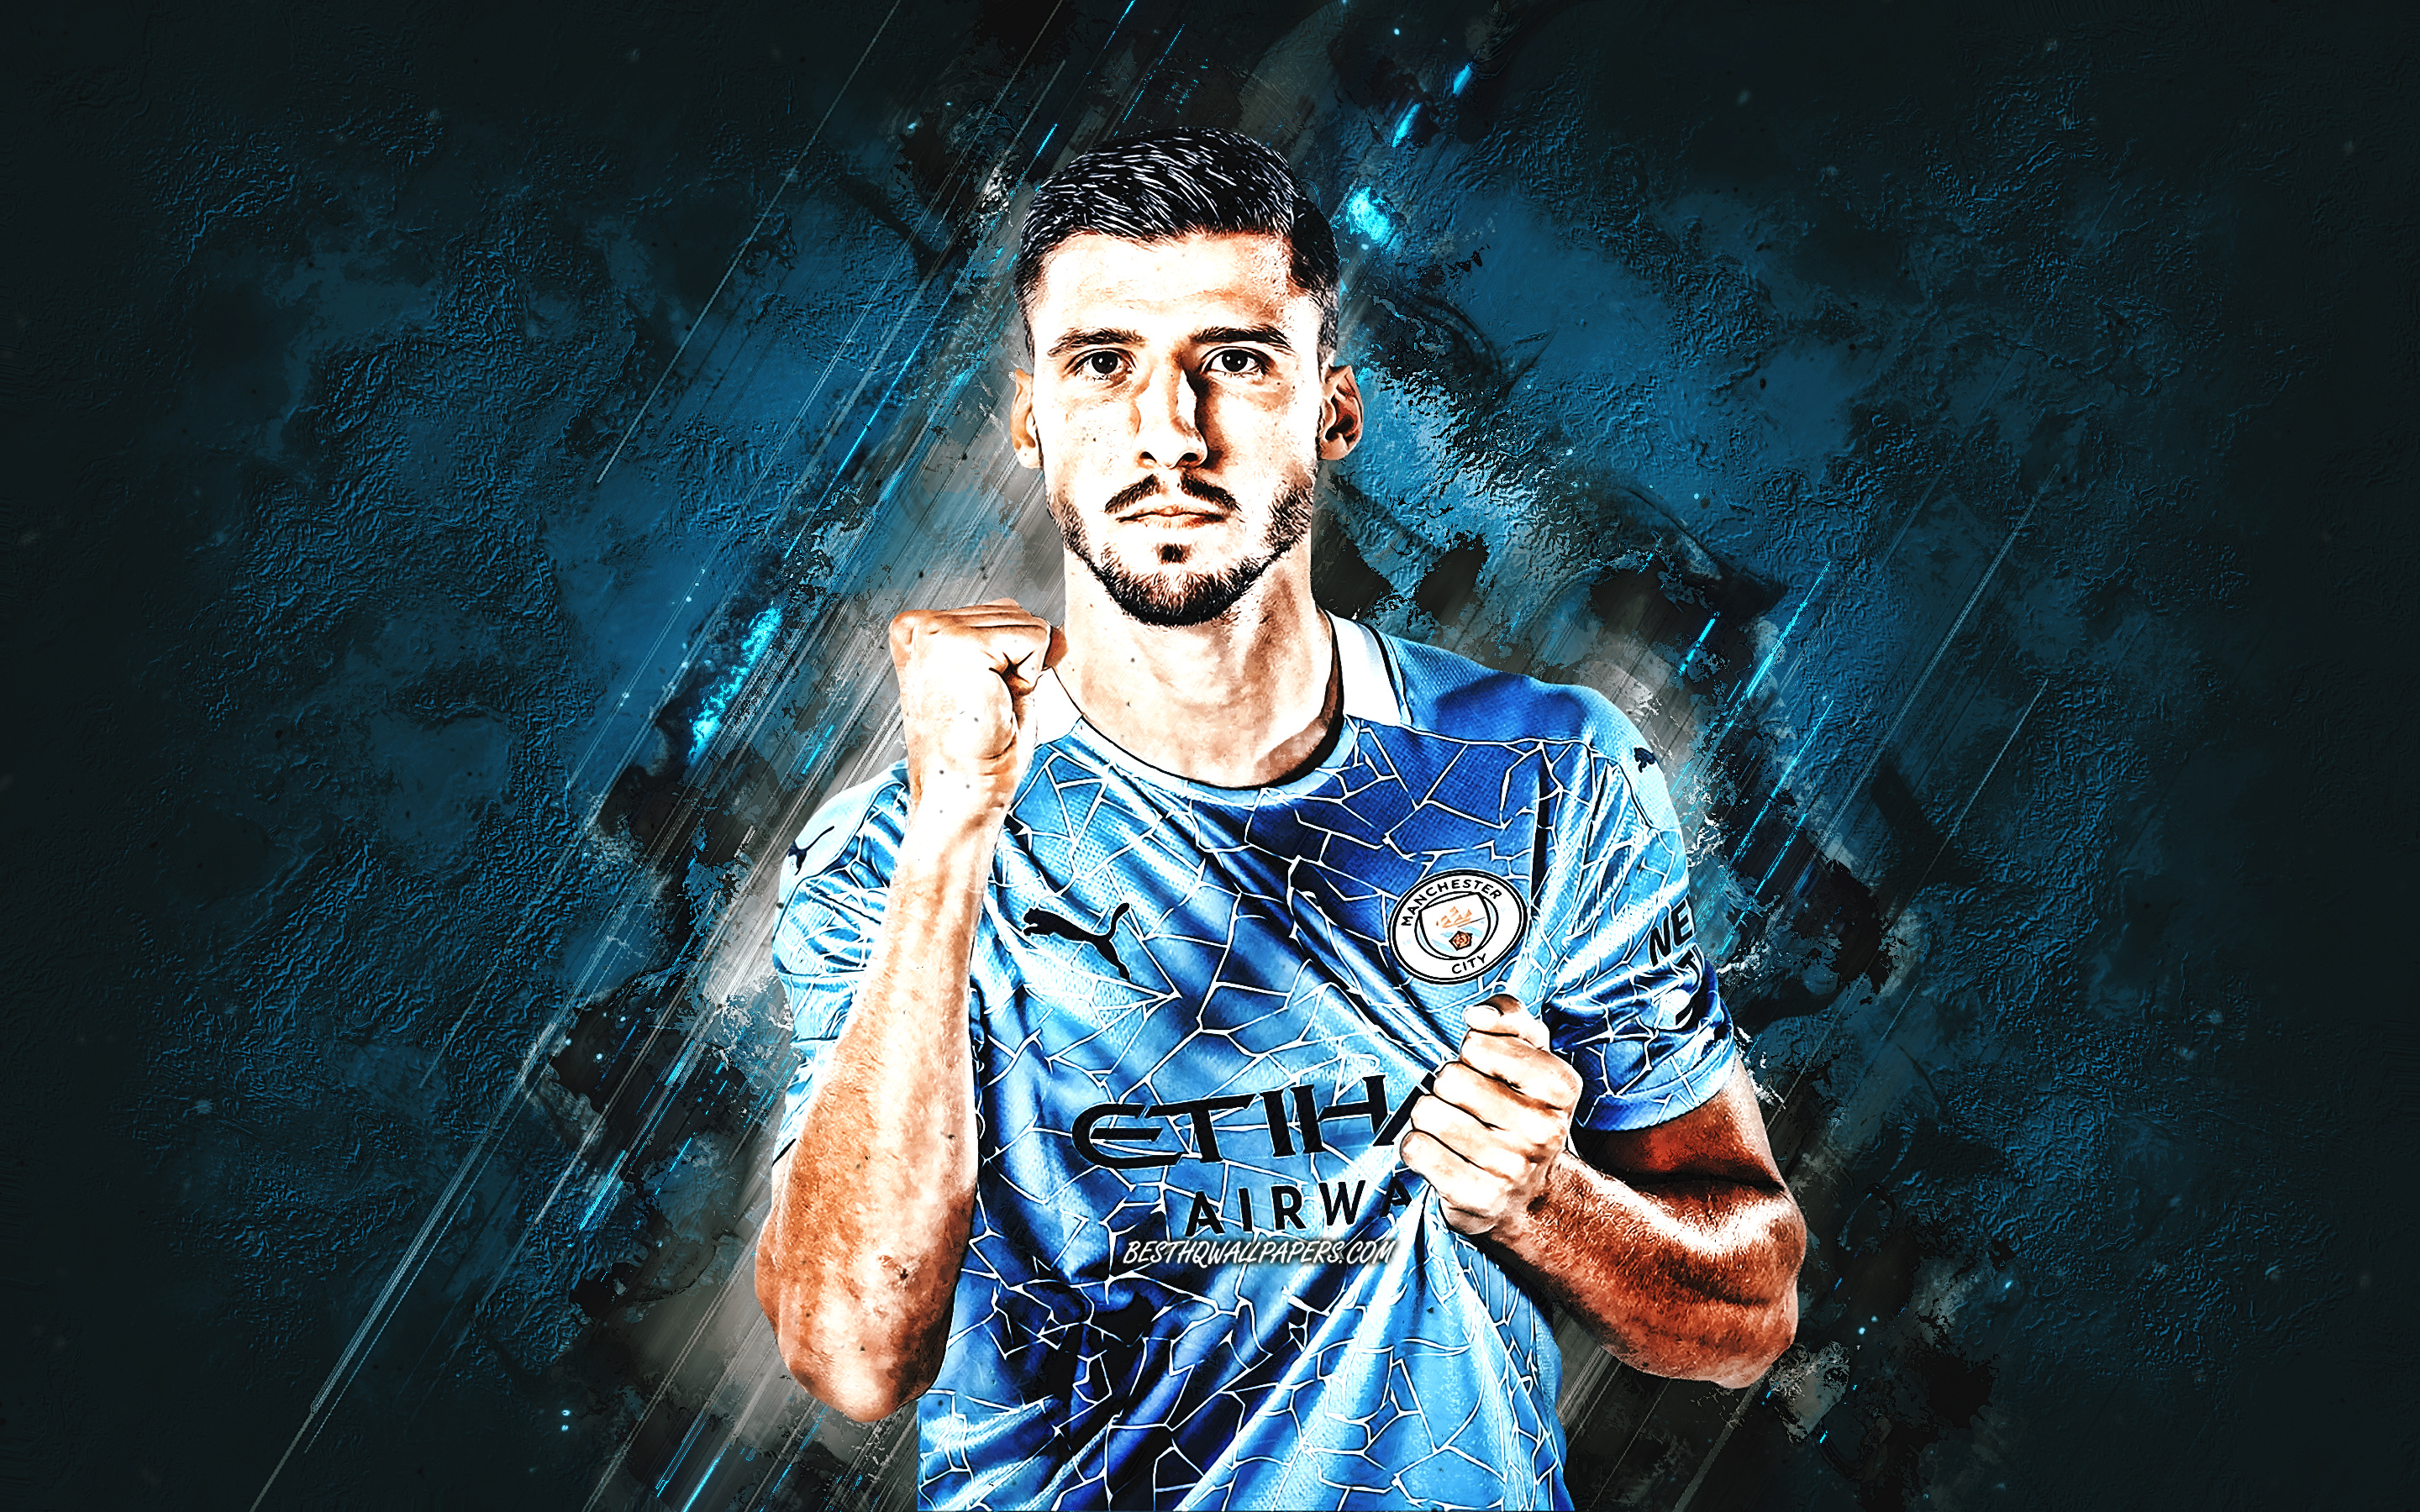 Download wallpaper Ruben Dias, Manchester City FC, Portuguese footballer, portrait, blue stone background, football for desktop with resolution 2880x1800. High Quality HD picture wallpaper